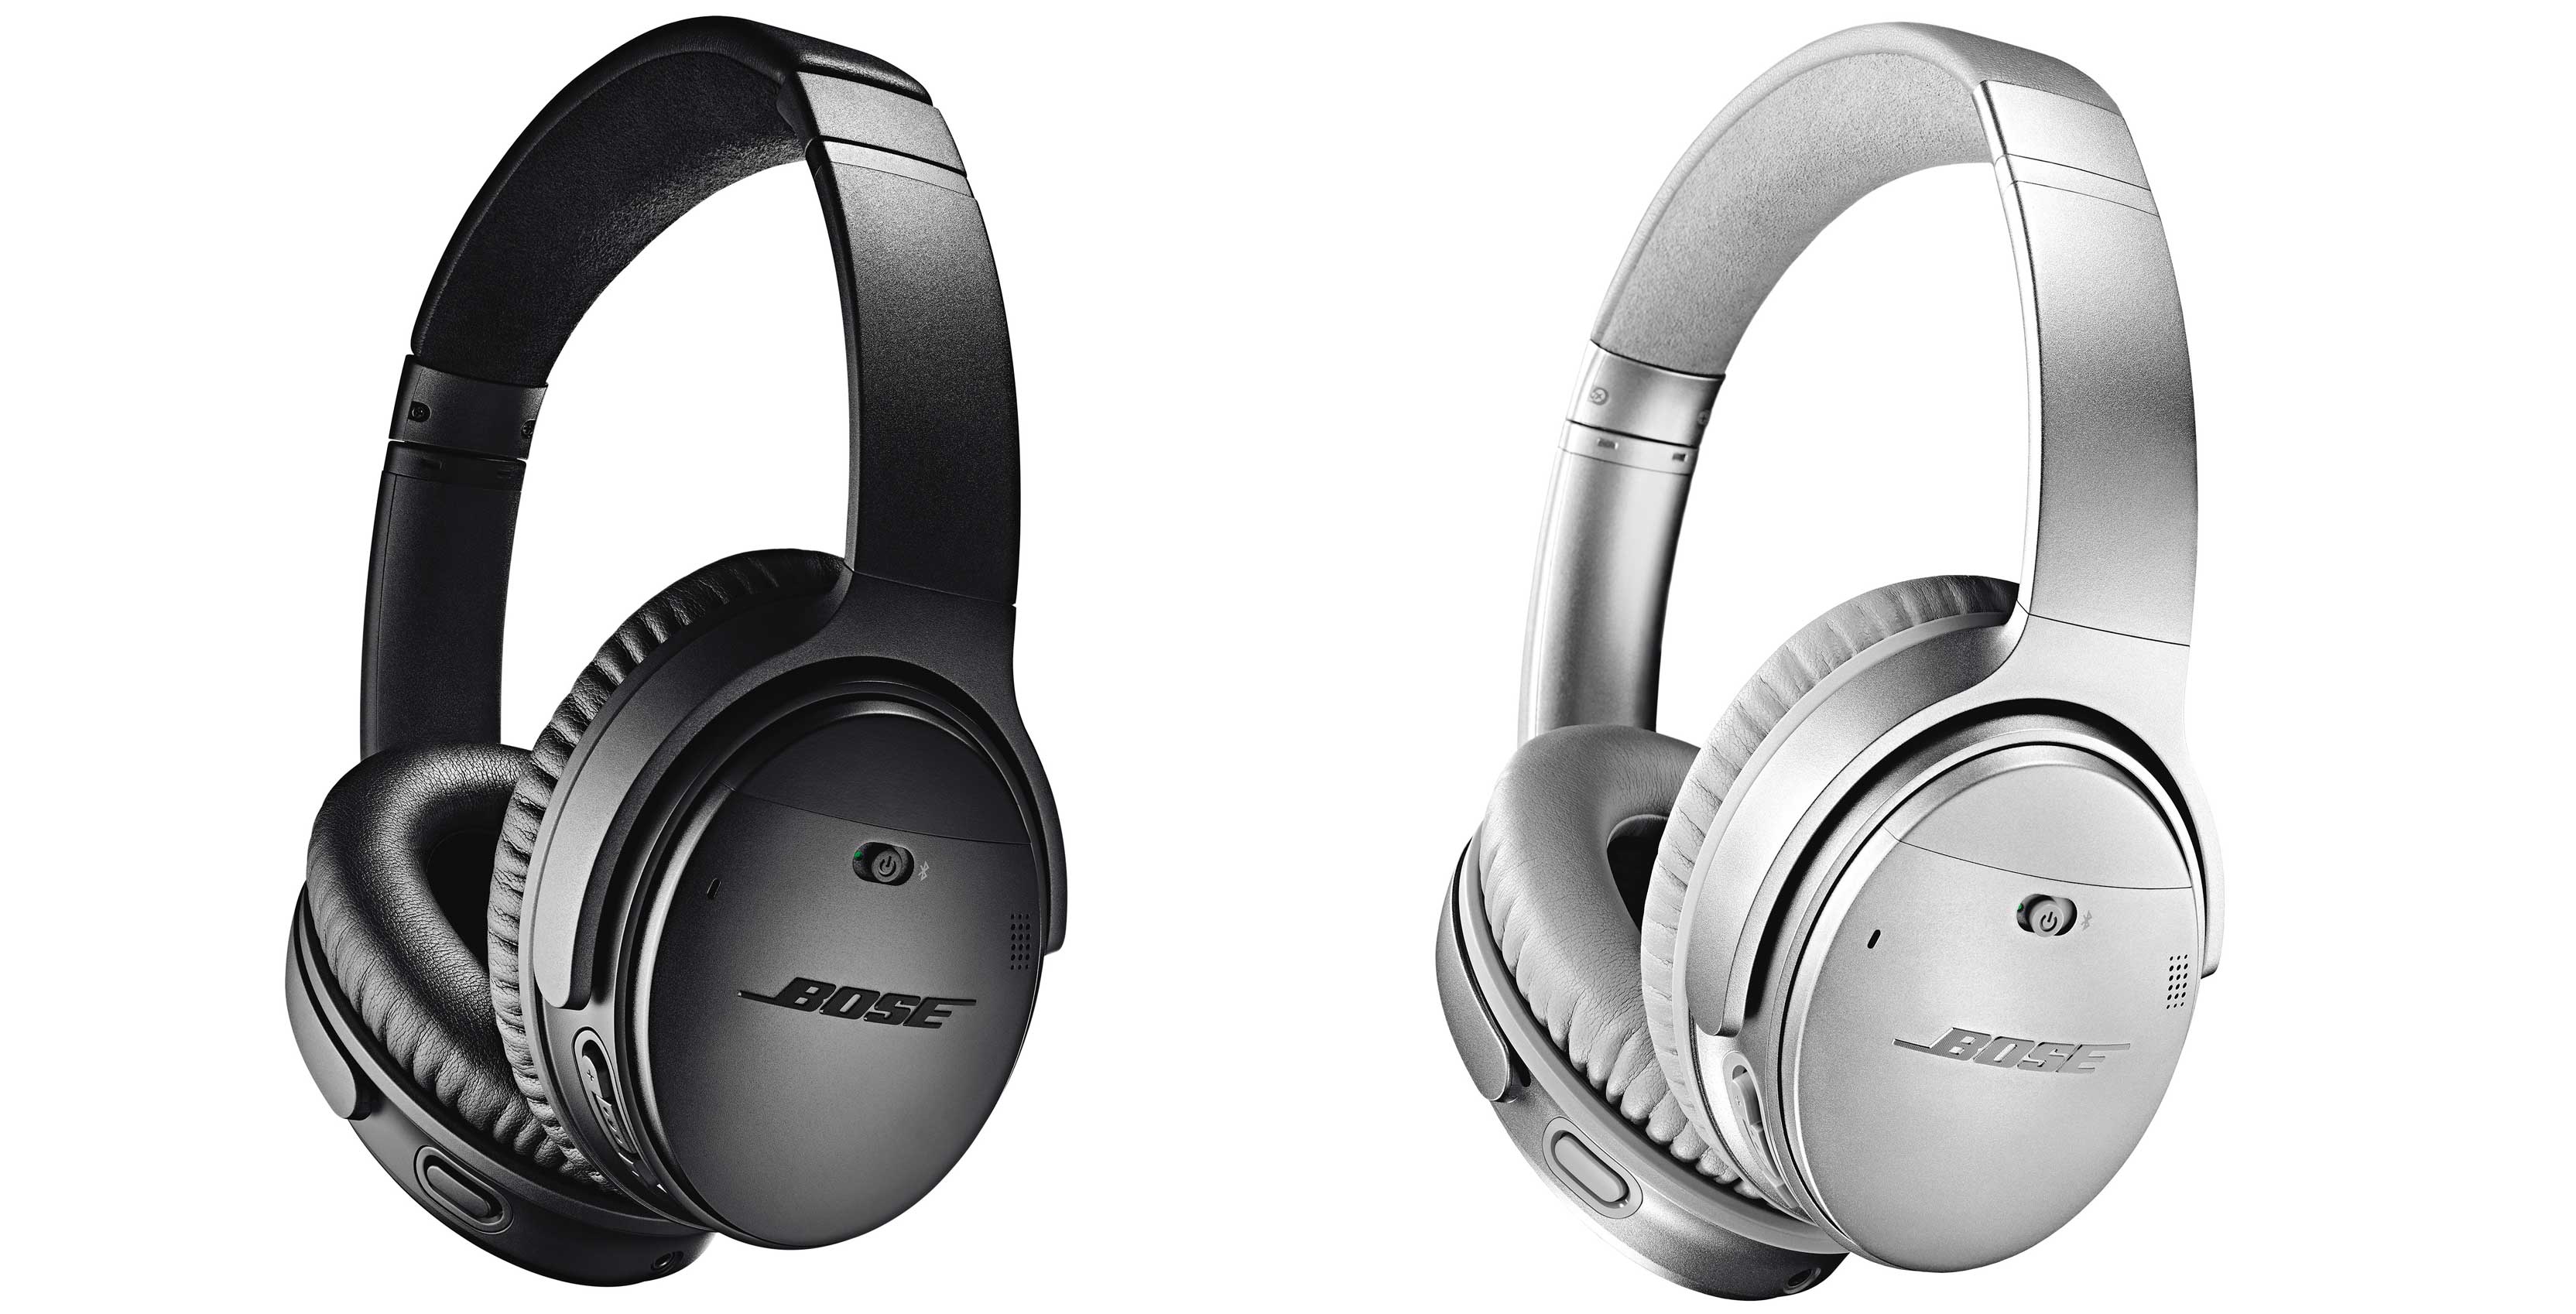 The black and silver Bose QC35 II headphones.